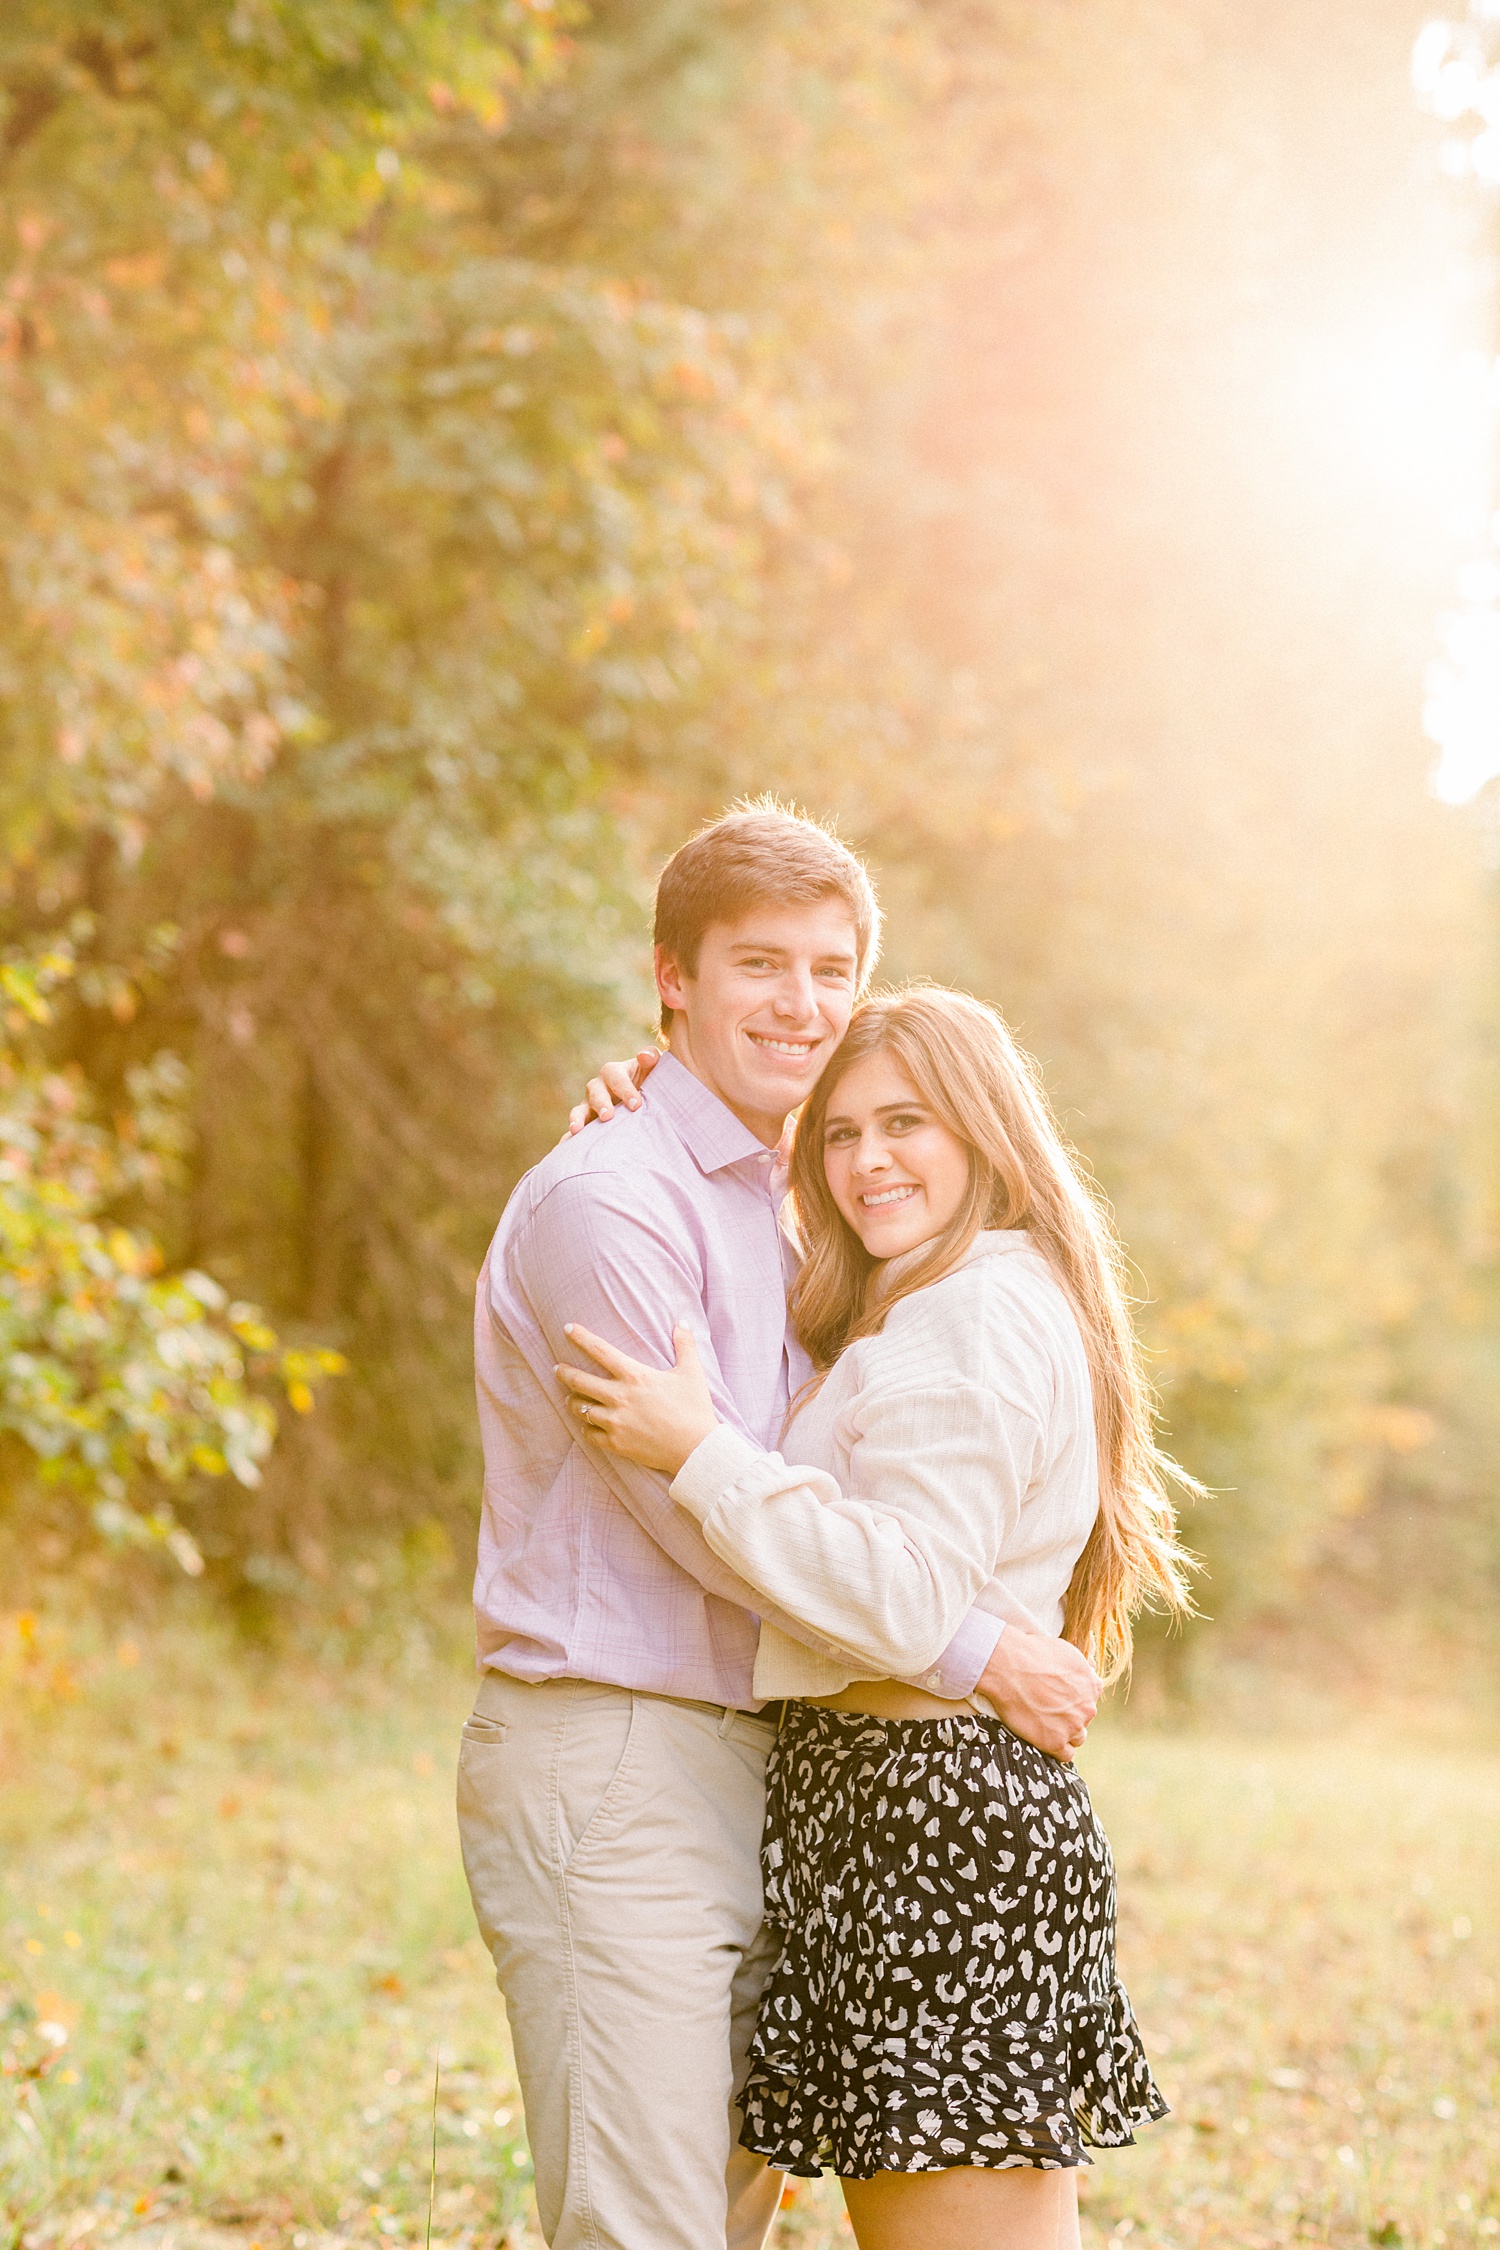 Alabama engagement portraits in local park